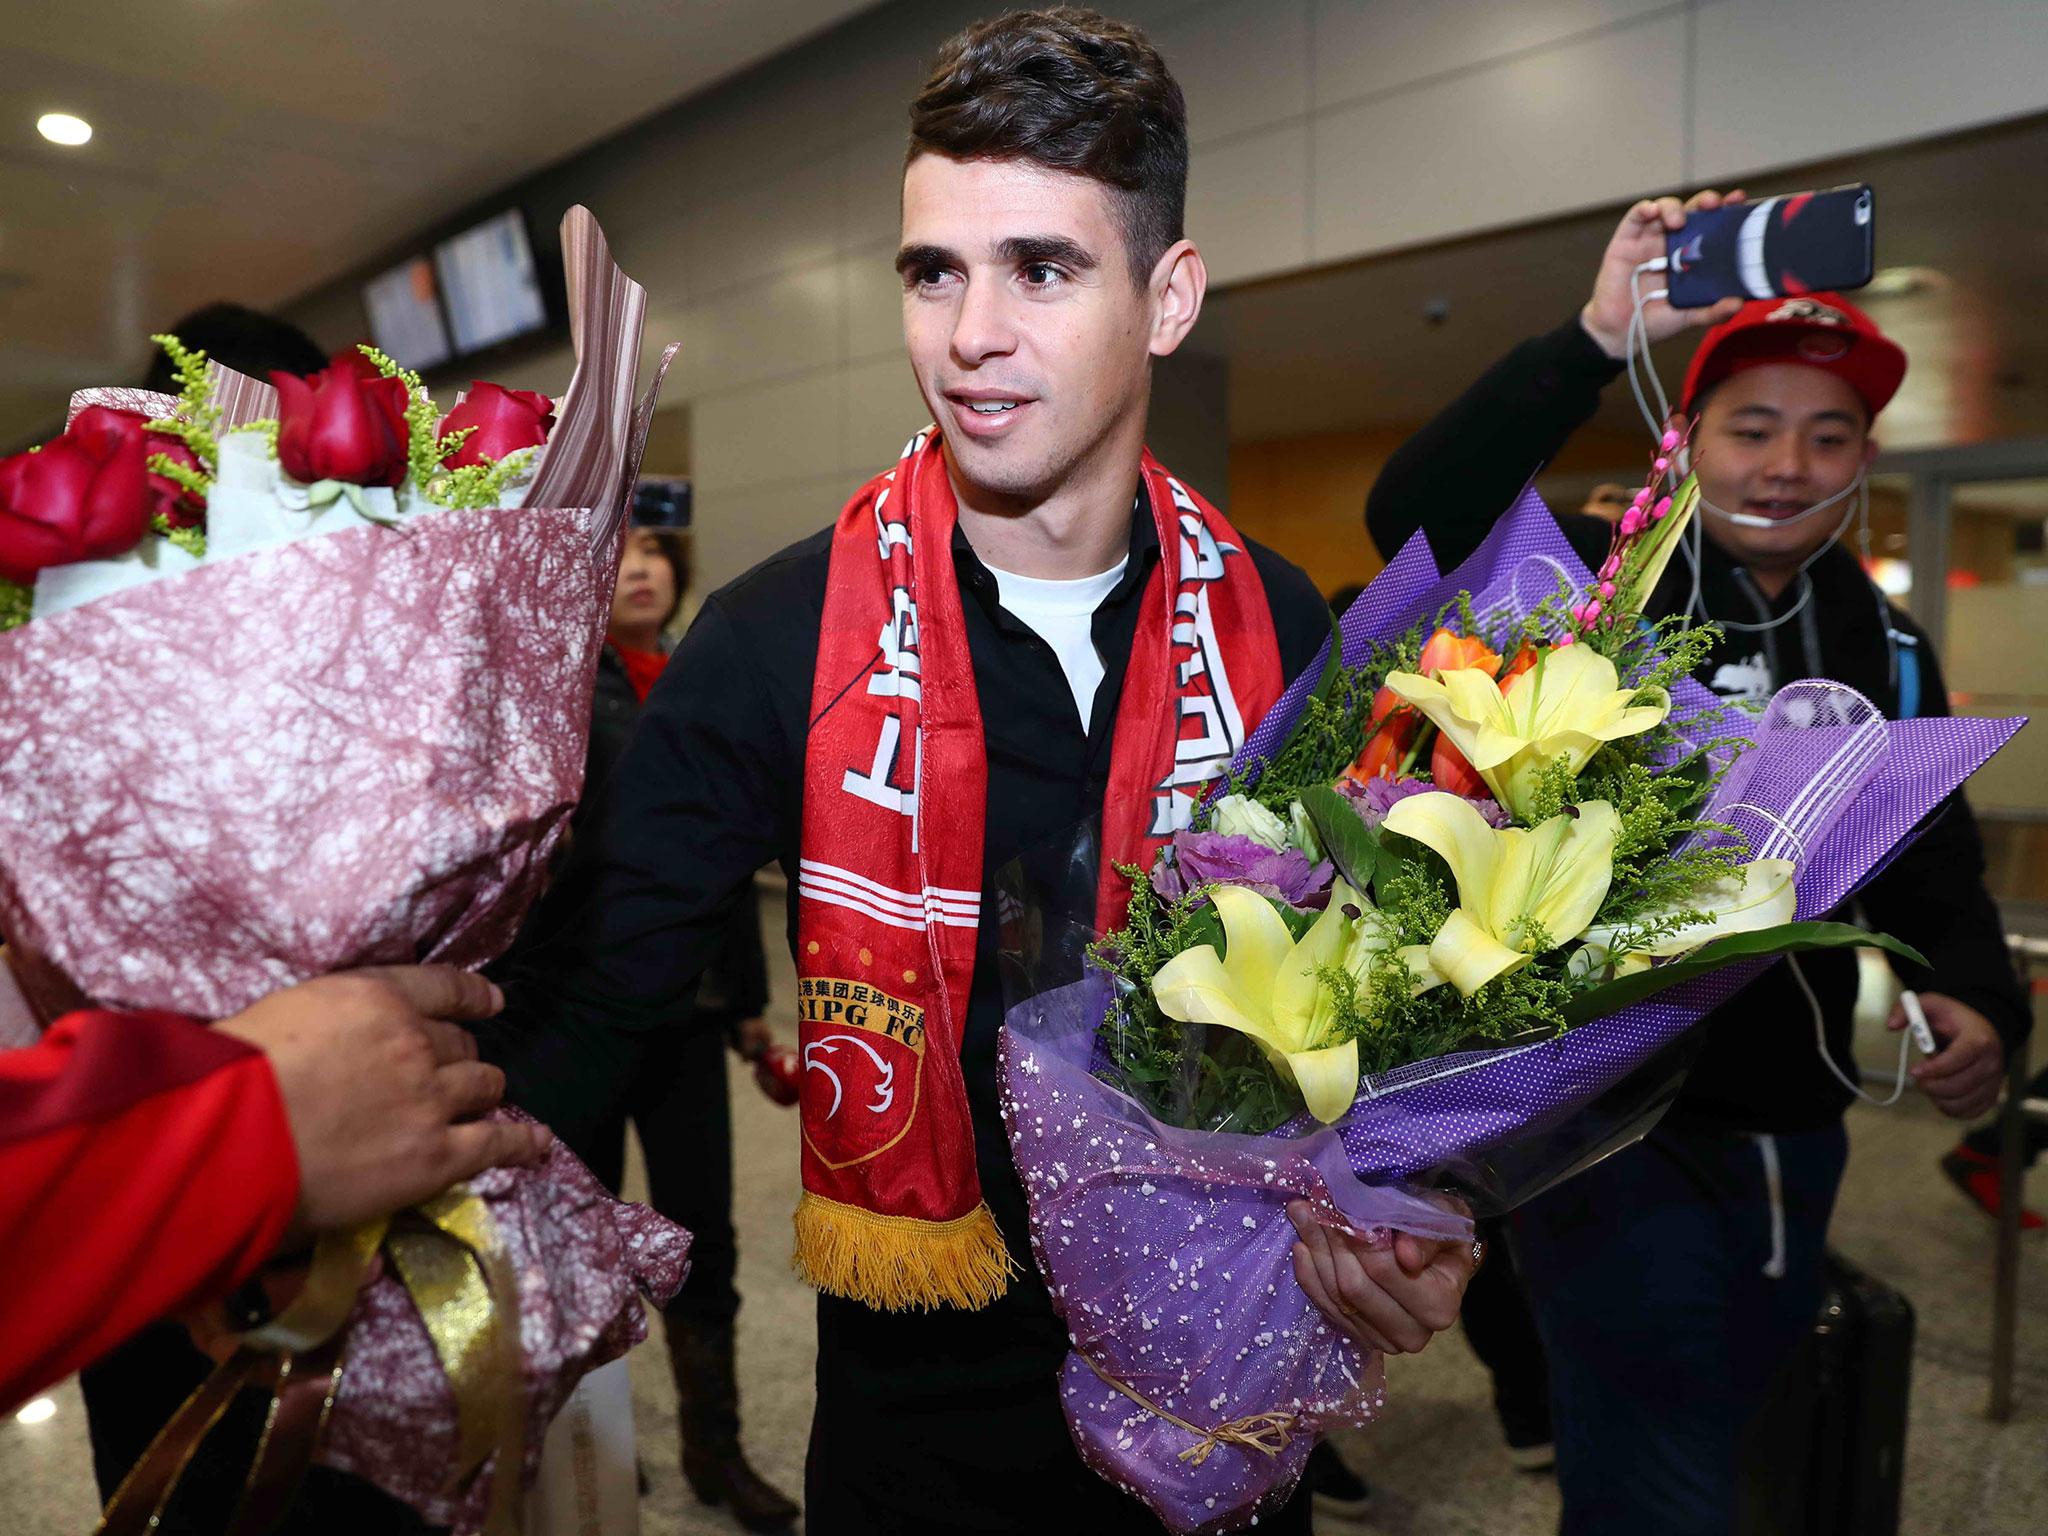 Oscar's £60m move to Chinese side Shanghai SIPG helped Premier League clubs make more than they spent